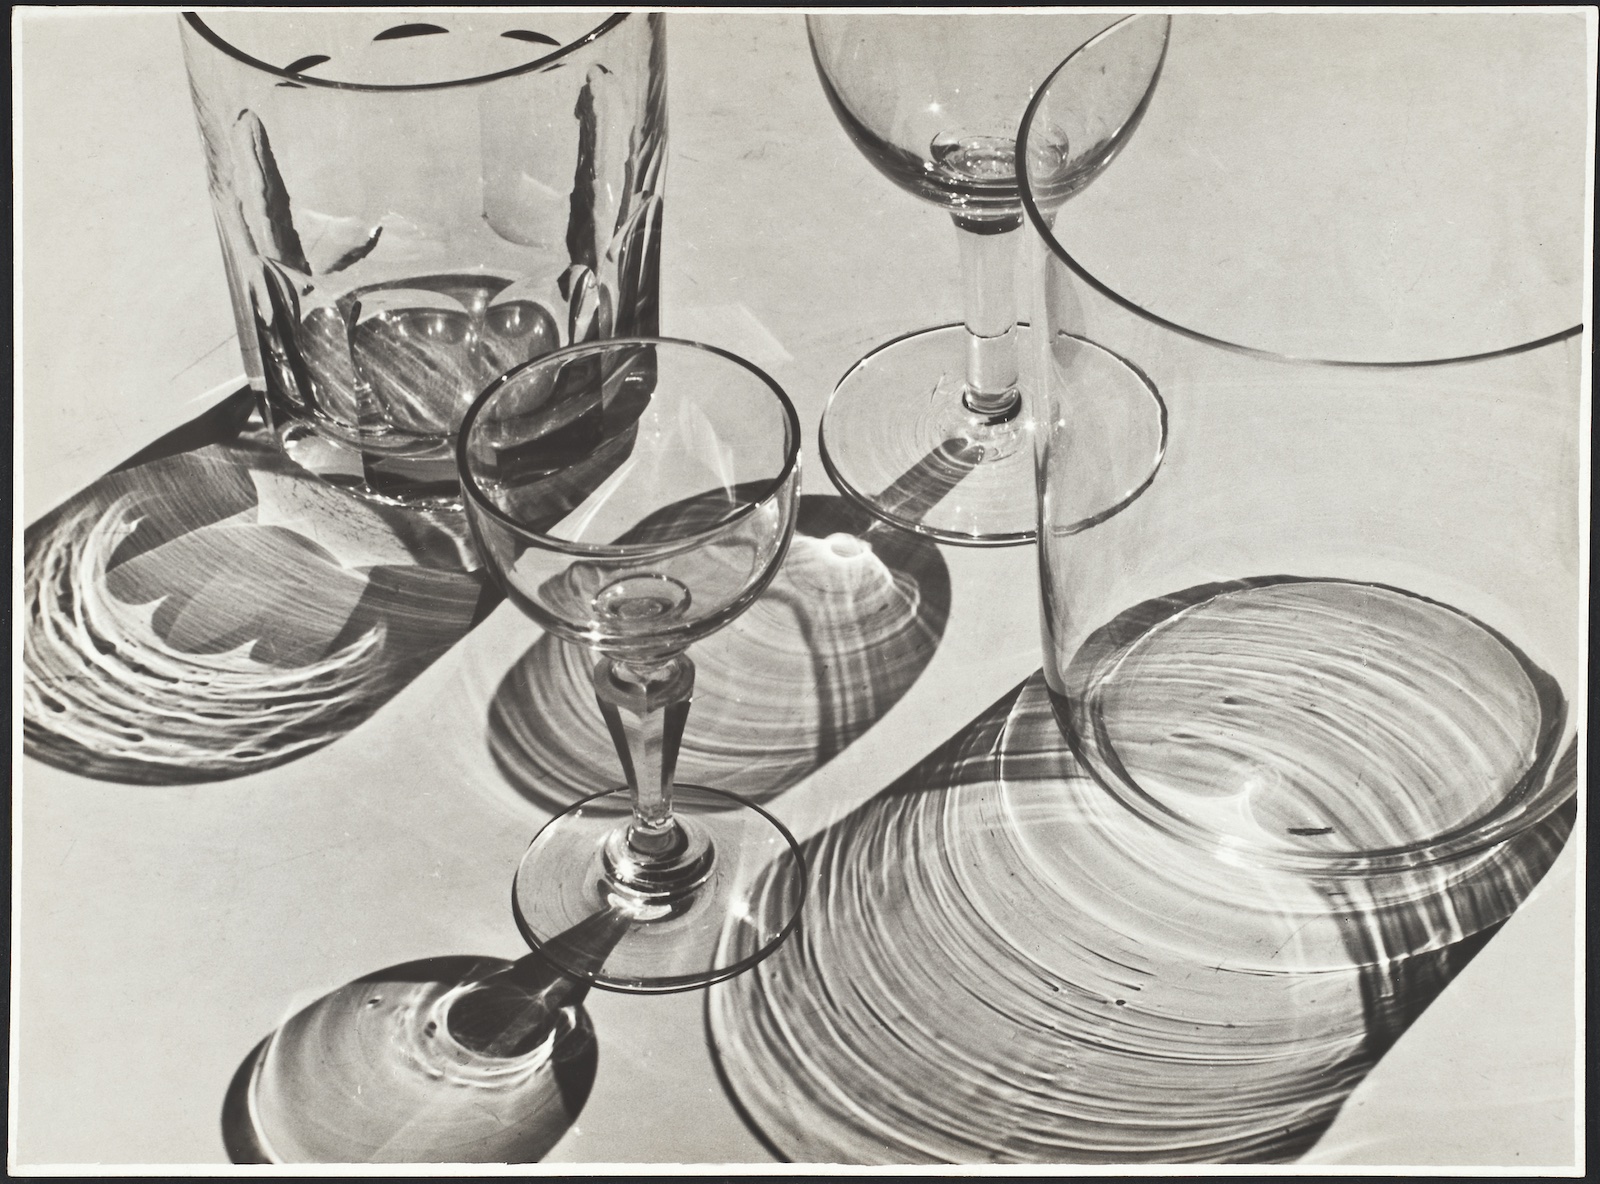 A black-and-white photograph of drinking glasses